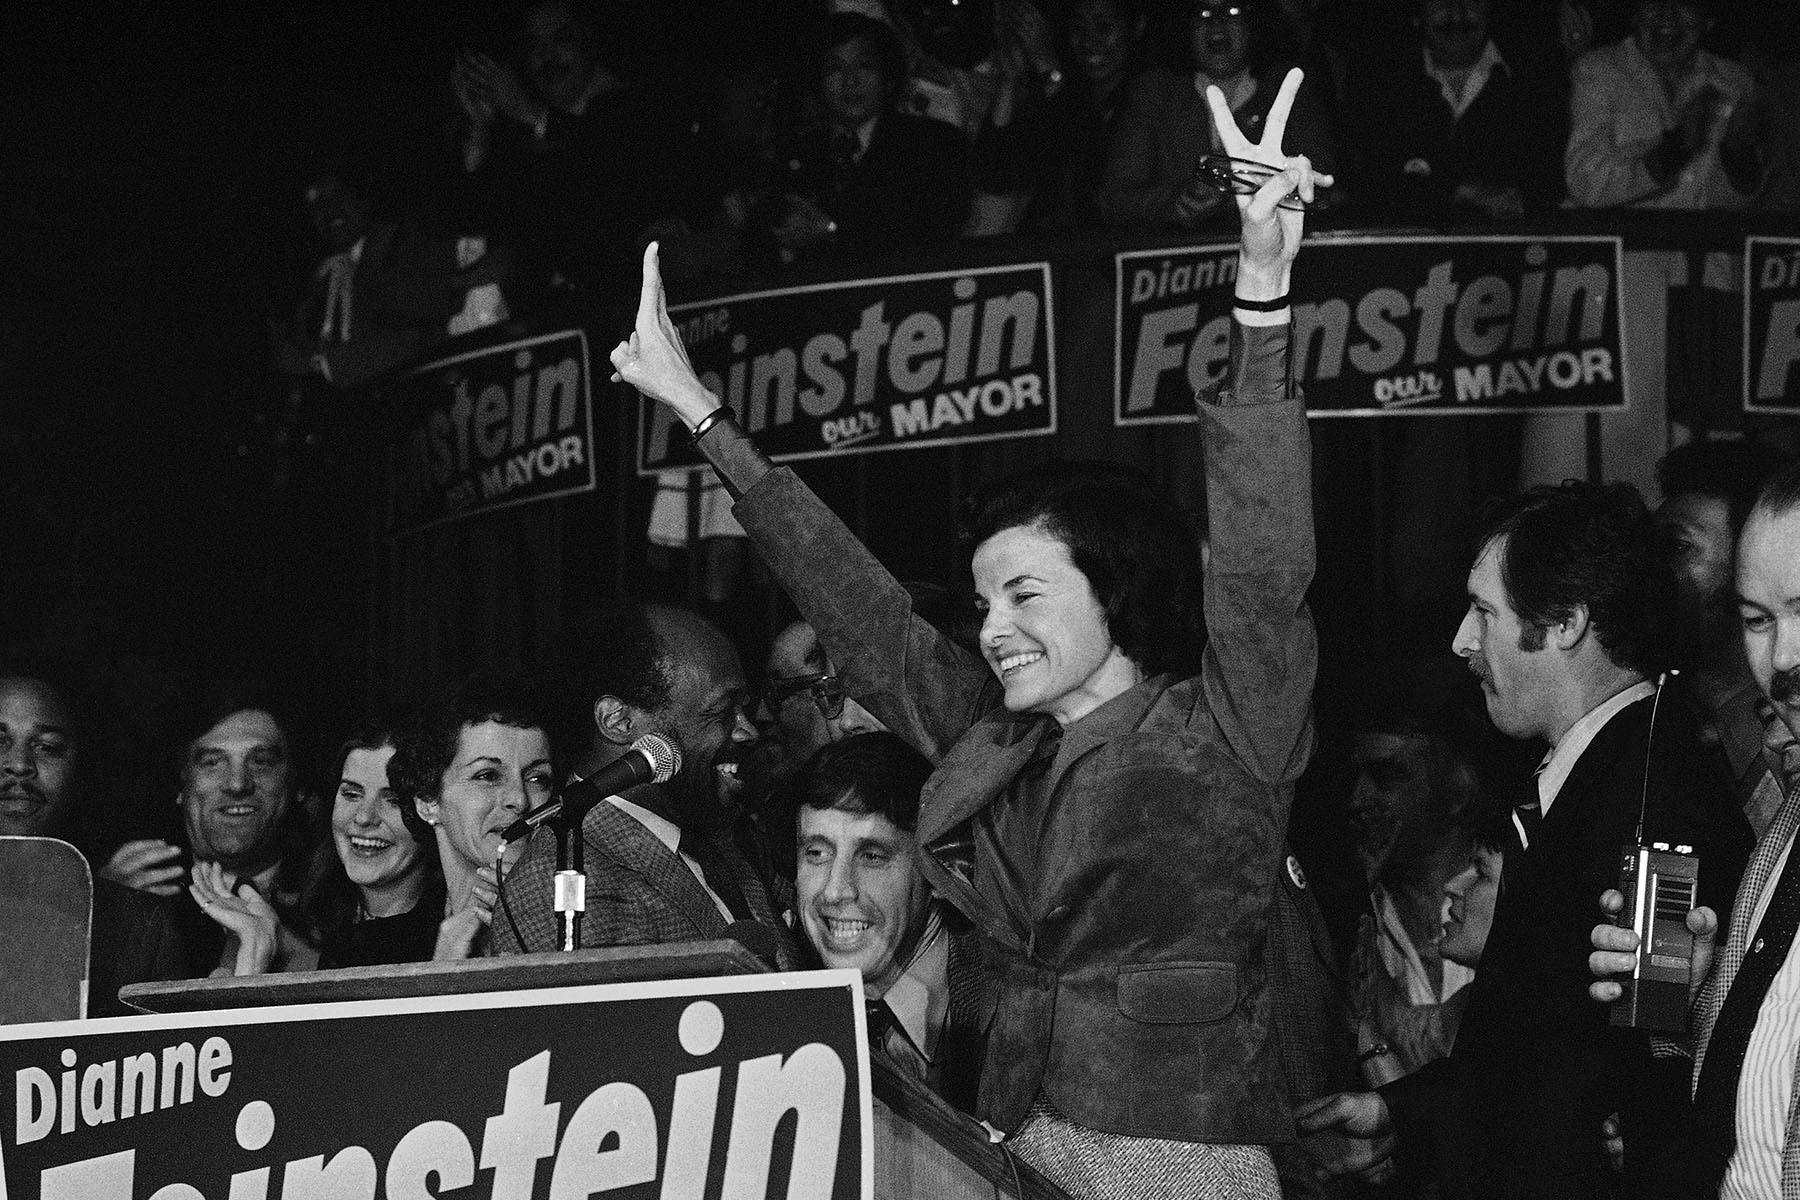 Feinstein celebrates after winning the election for San Fransisco Mayor.